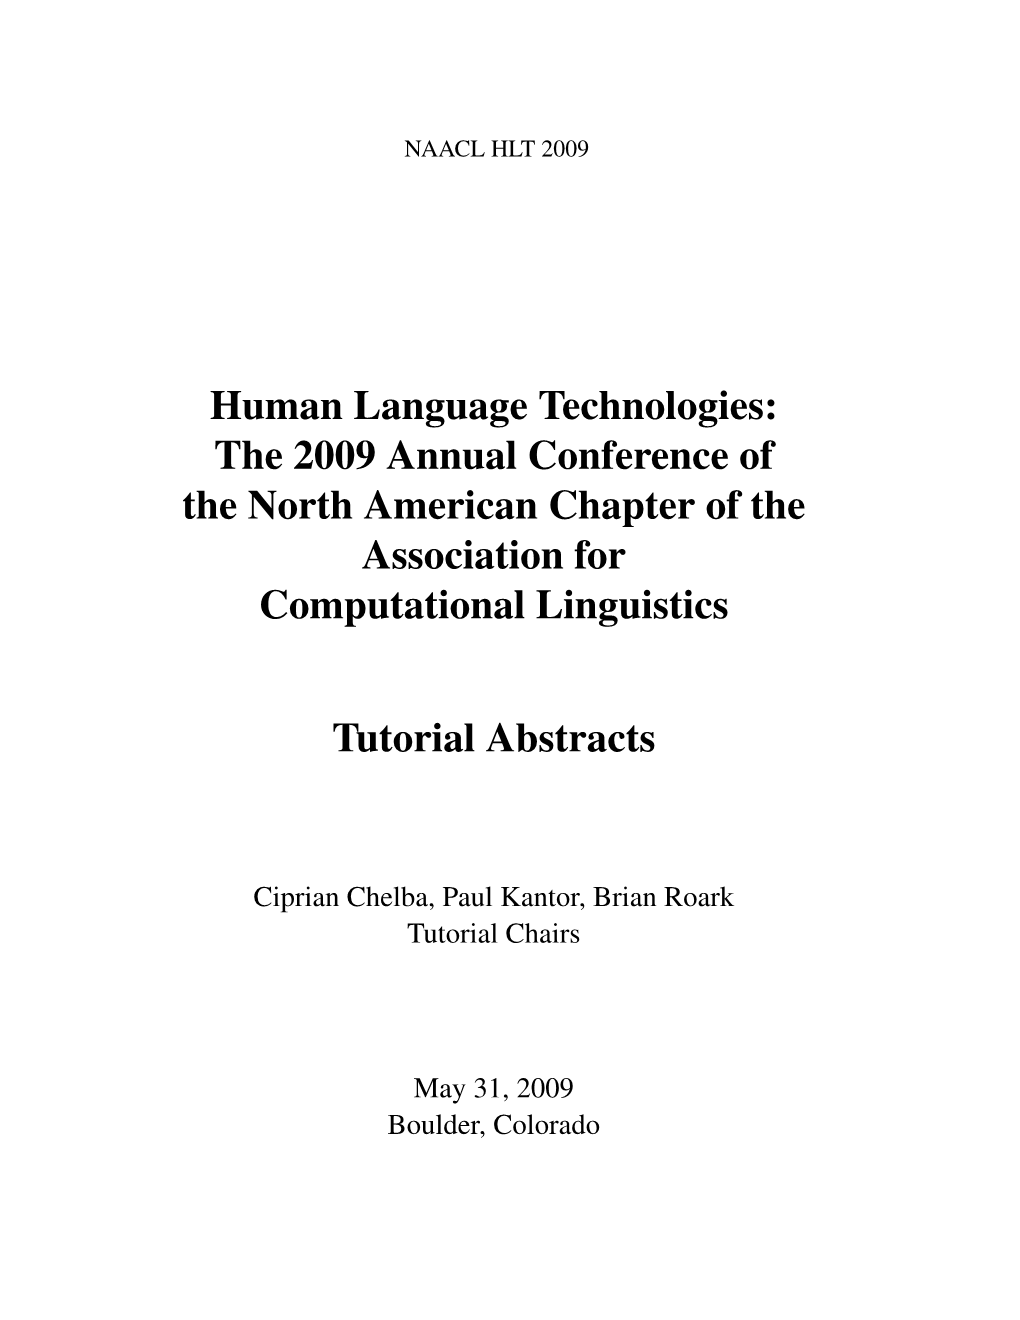 Human Language Technologies: the 2009 Annual Conference of the North American Chapter of the Association for Computational Linguistics